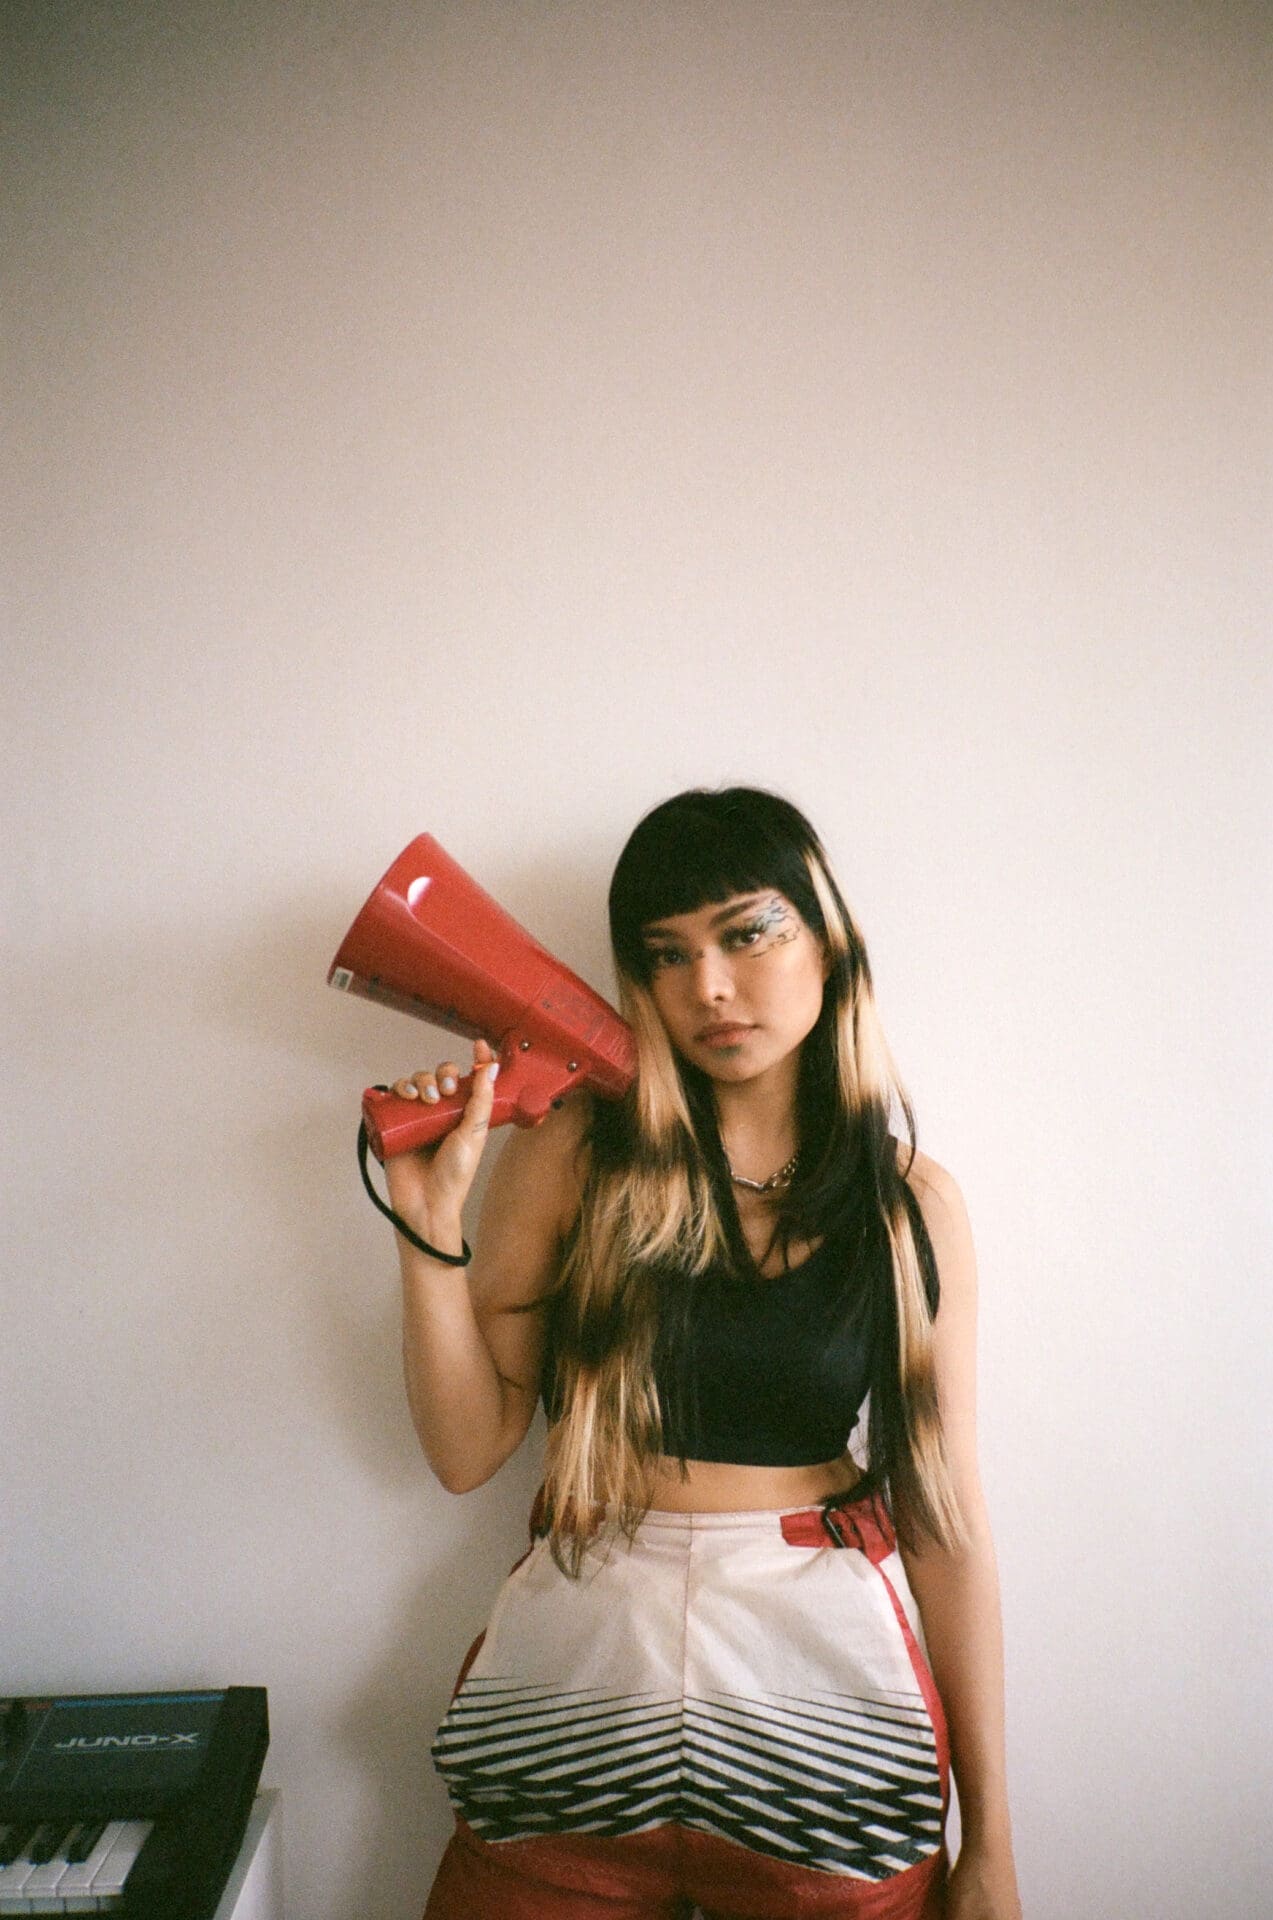 An interview with Thai pop singer Pyra | Pyra standing against a white wall inside, holding a red speakerphone in her right hand, with a Juno synthesiser in the left hand corner of the image.